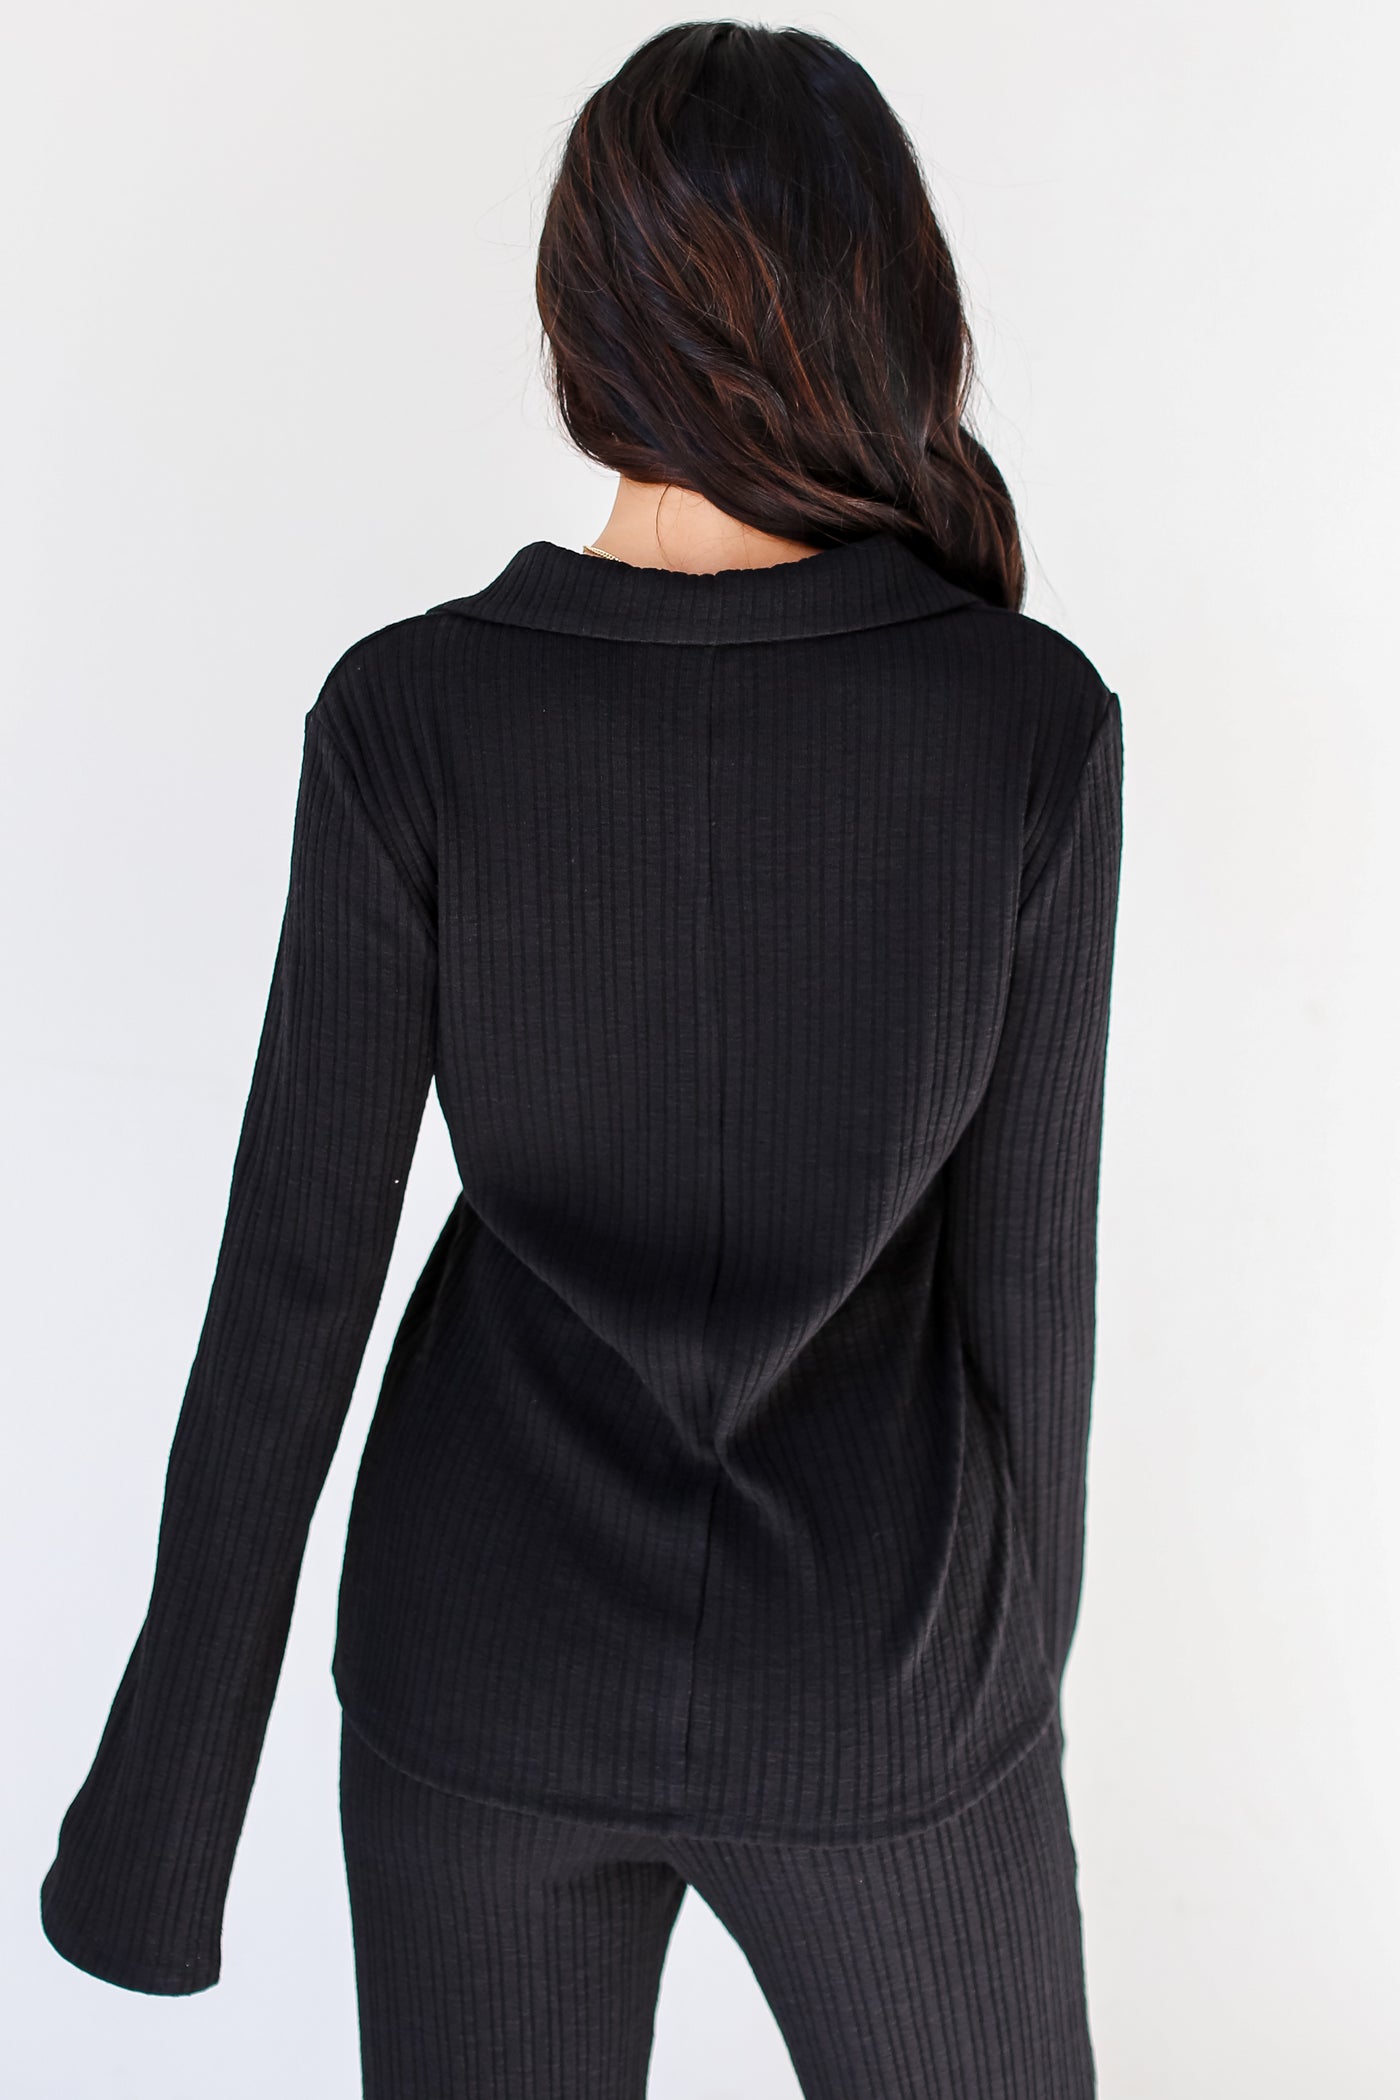 black Ribbed Knit Top  back view